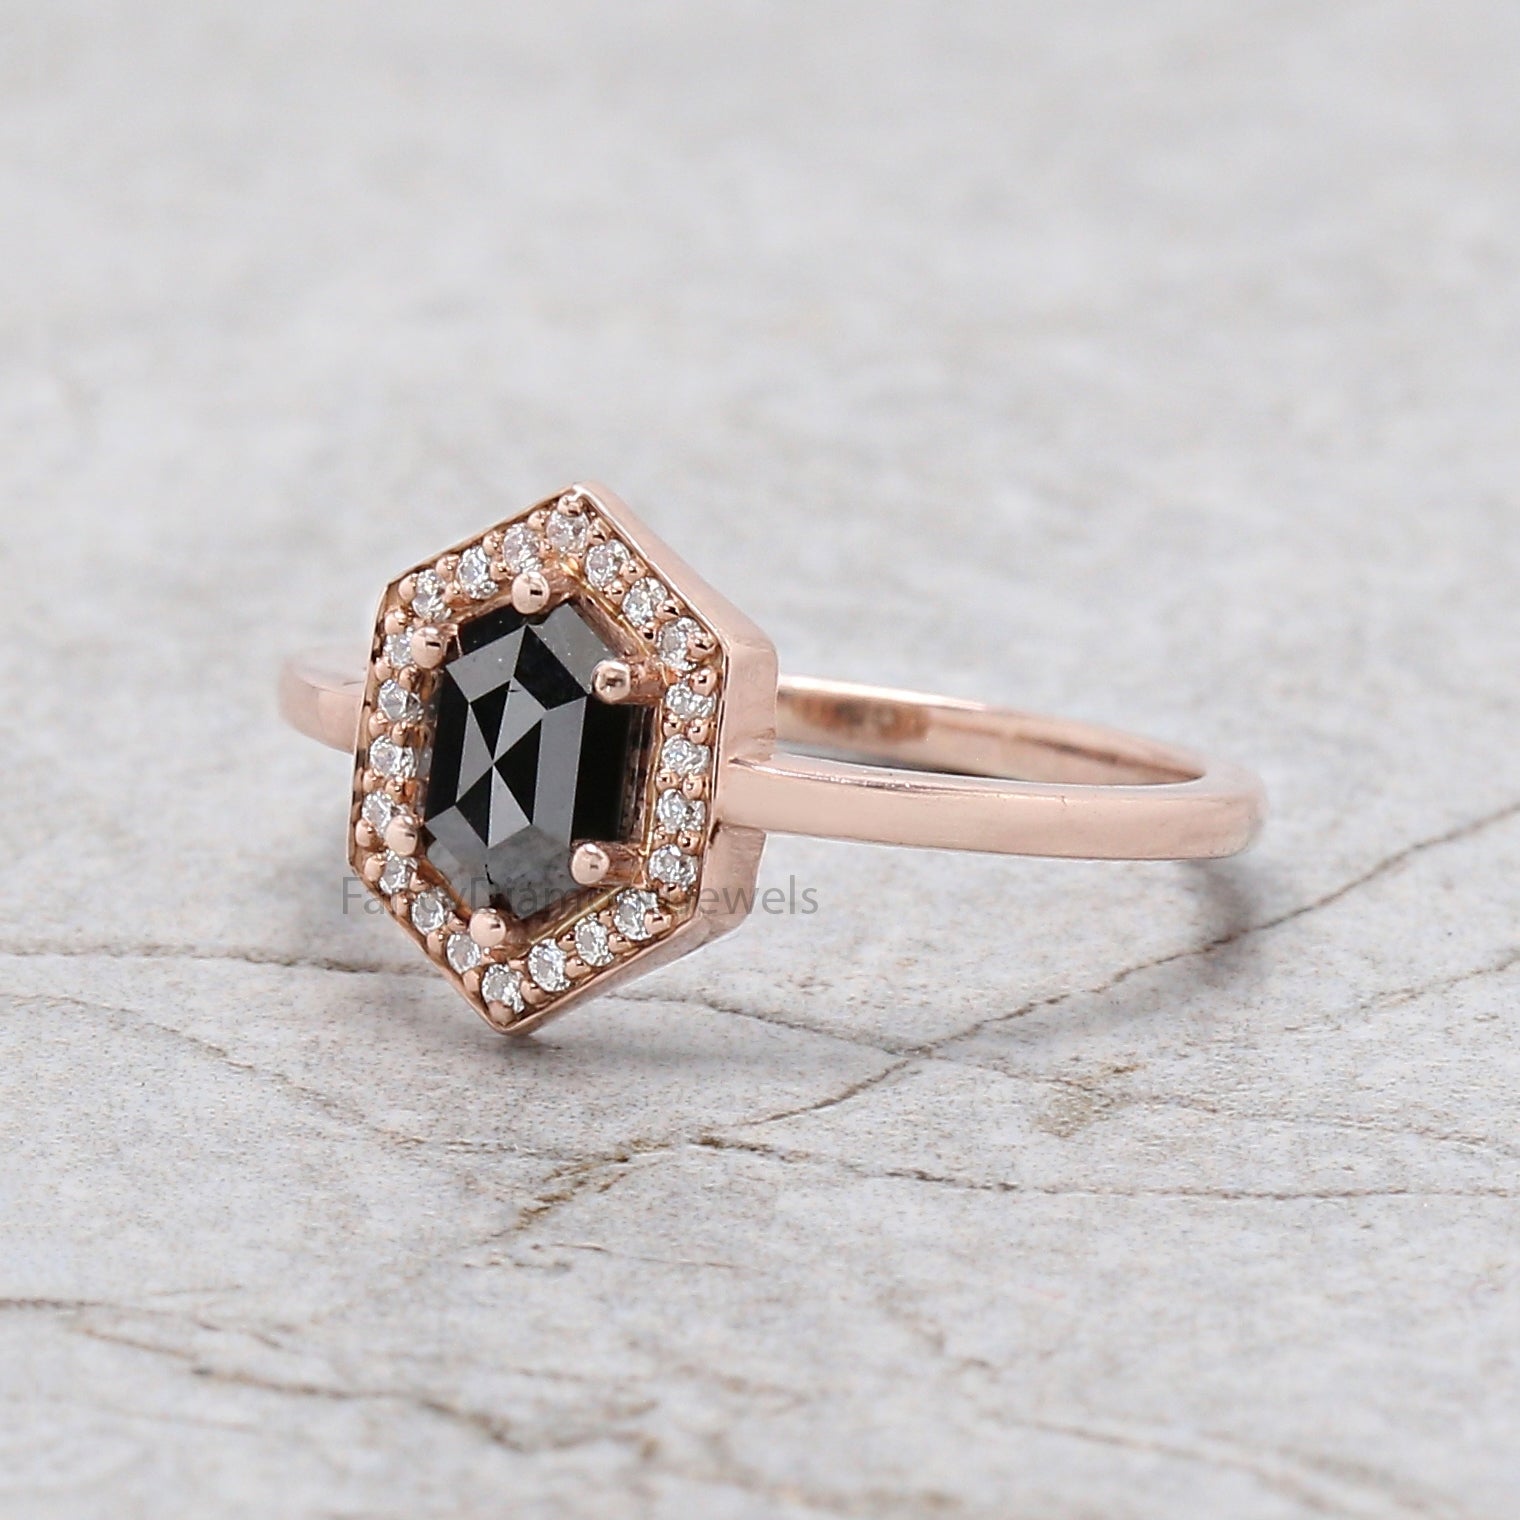 Hexagon Cut Black Color Diamond Ring 0.56 Ct 6.84 MM Hexagon Diamond Ring 14K Rose Gold Silver Hexagon Engagement Ring Gift For Her QN2233